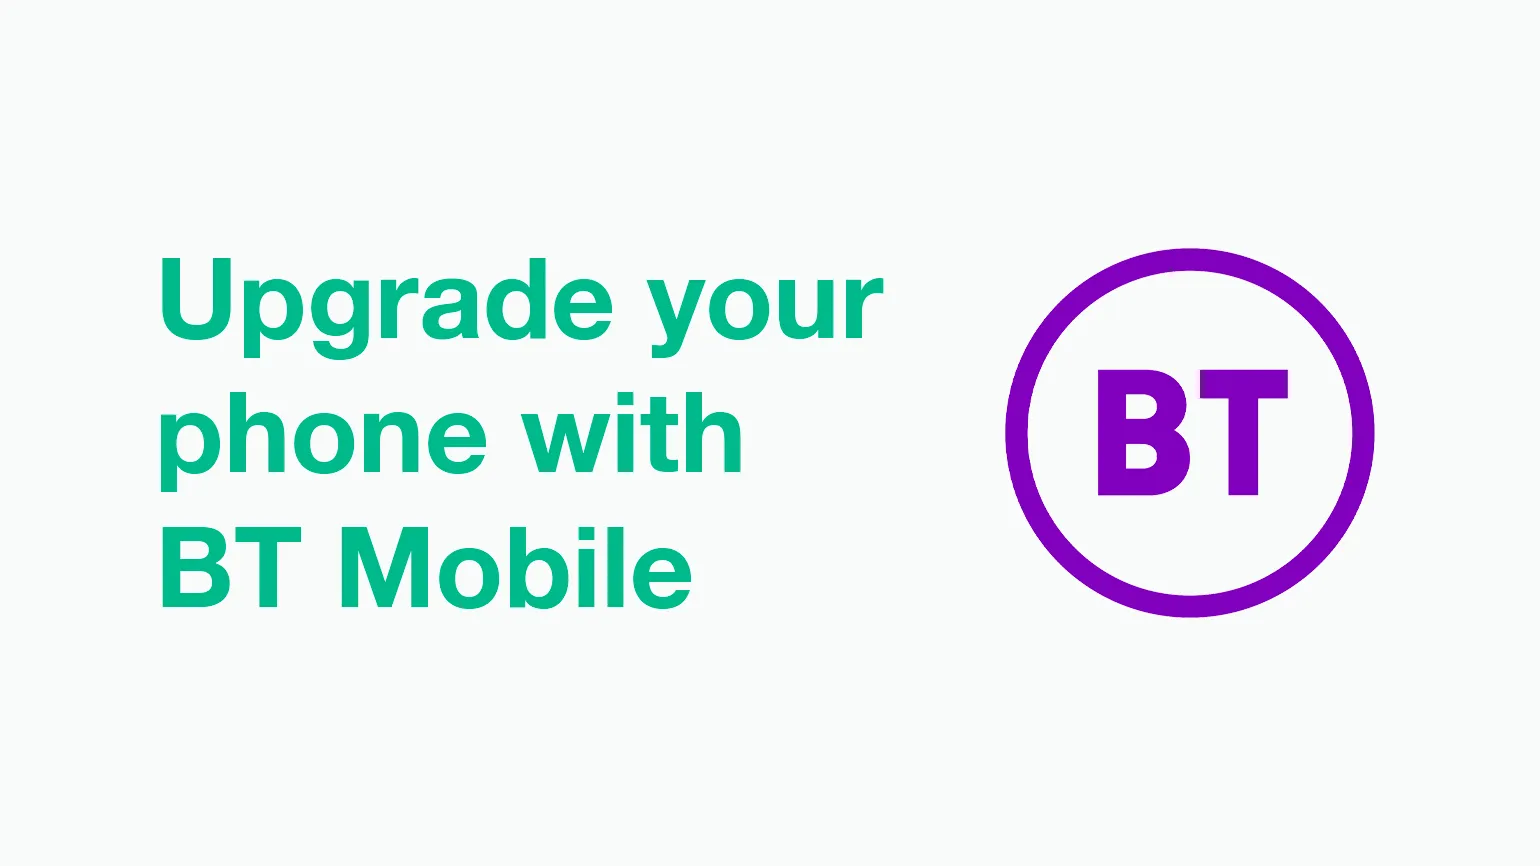 Upgrading your phone on BT Mobile